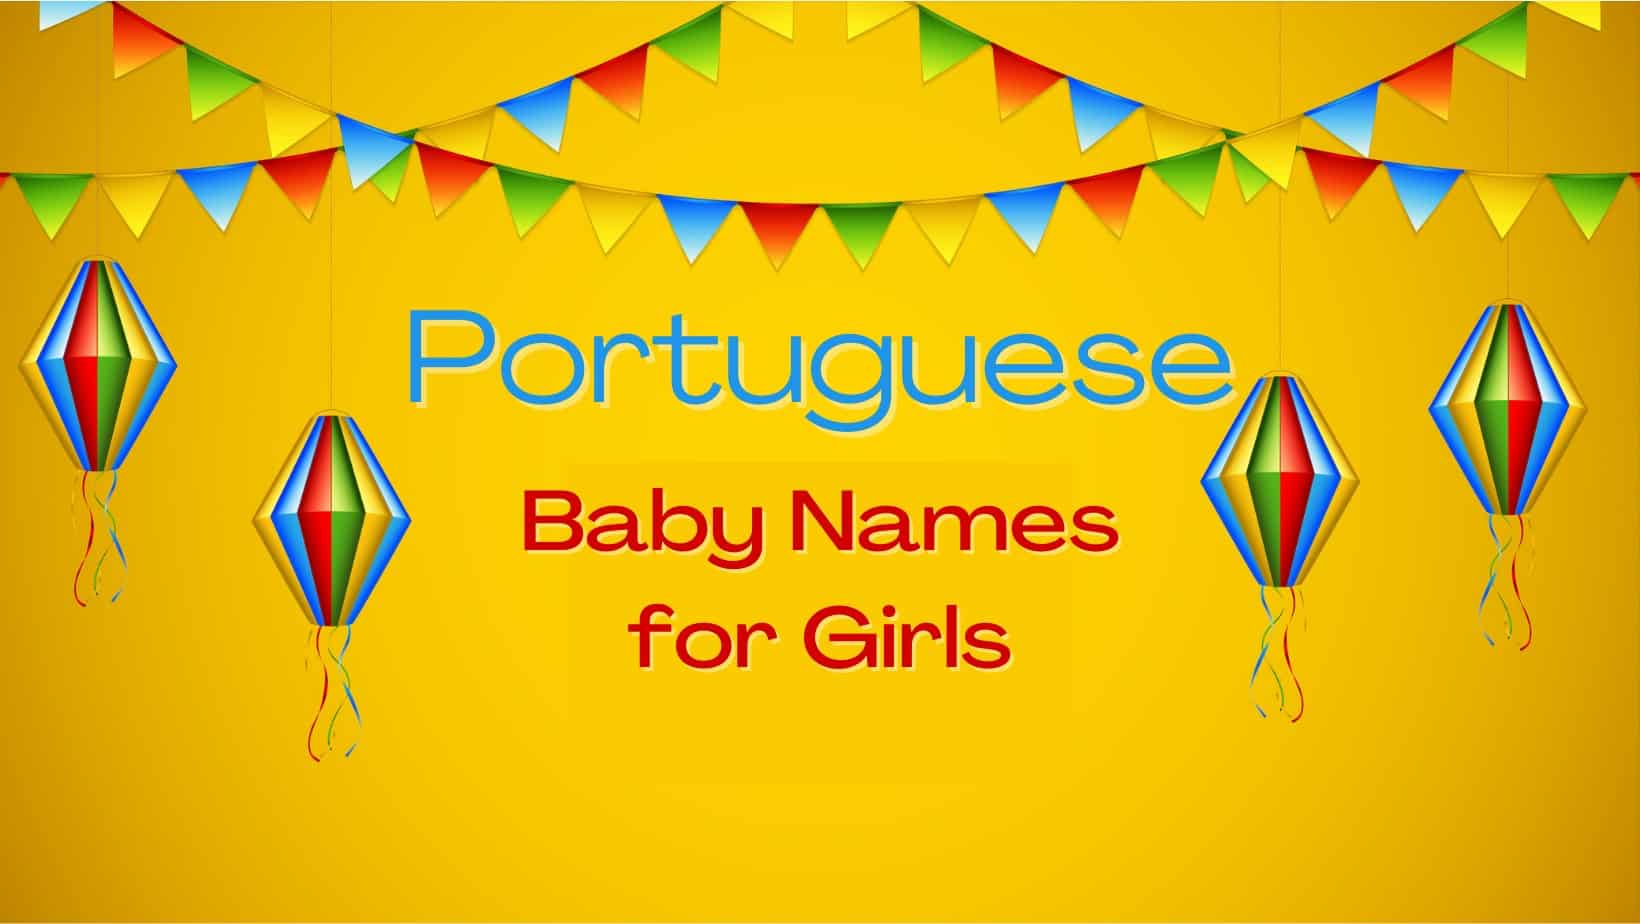 Portuguese baby names for girls